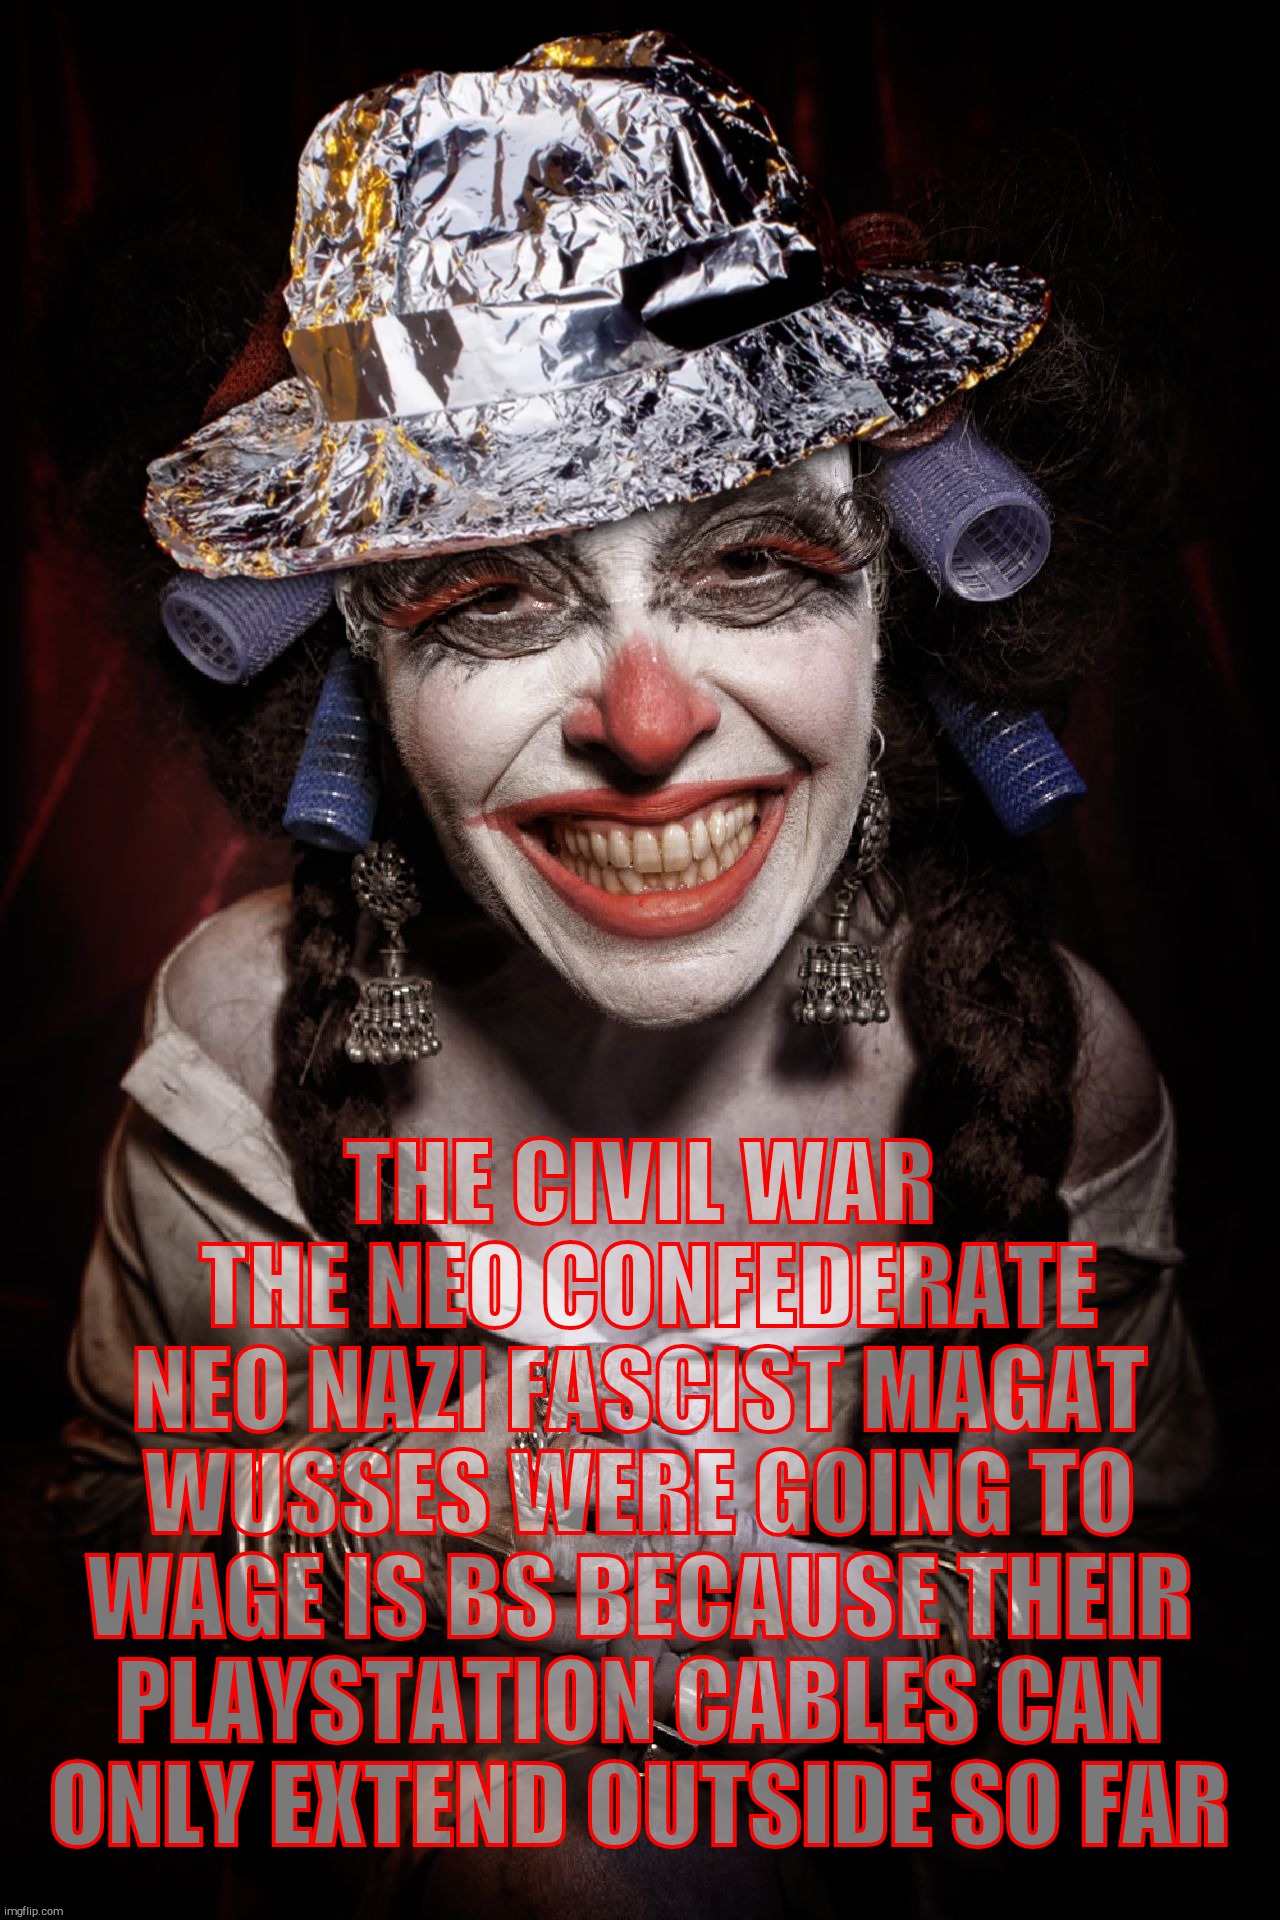 We stood on the precipice of the dawn of civil war between who the heck knows what, then the seditious MAGAts went home to cry | THE CIVIL WAR      THE NEO CONFEDERATE NEO NAZI FASCIST MAGAT WUSSES WERE GOING TO WAGE IS BS BECAUSE THEIR PLAYSTATION CABLES CAN  ONLY EXT | image tagged in tin foil hat clown,clownville by eolo perfido,tin foil hat,civil war 2 not happening,trump is over,later losers | made w/ Imgflip meme maker